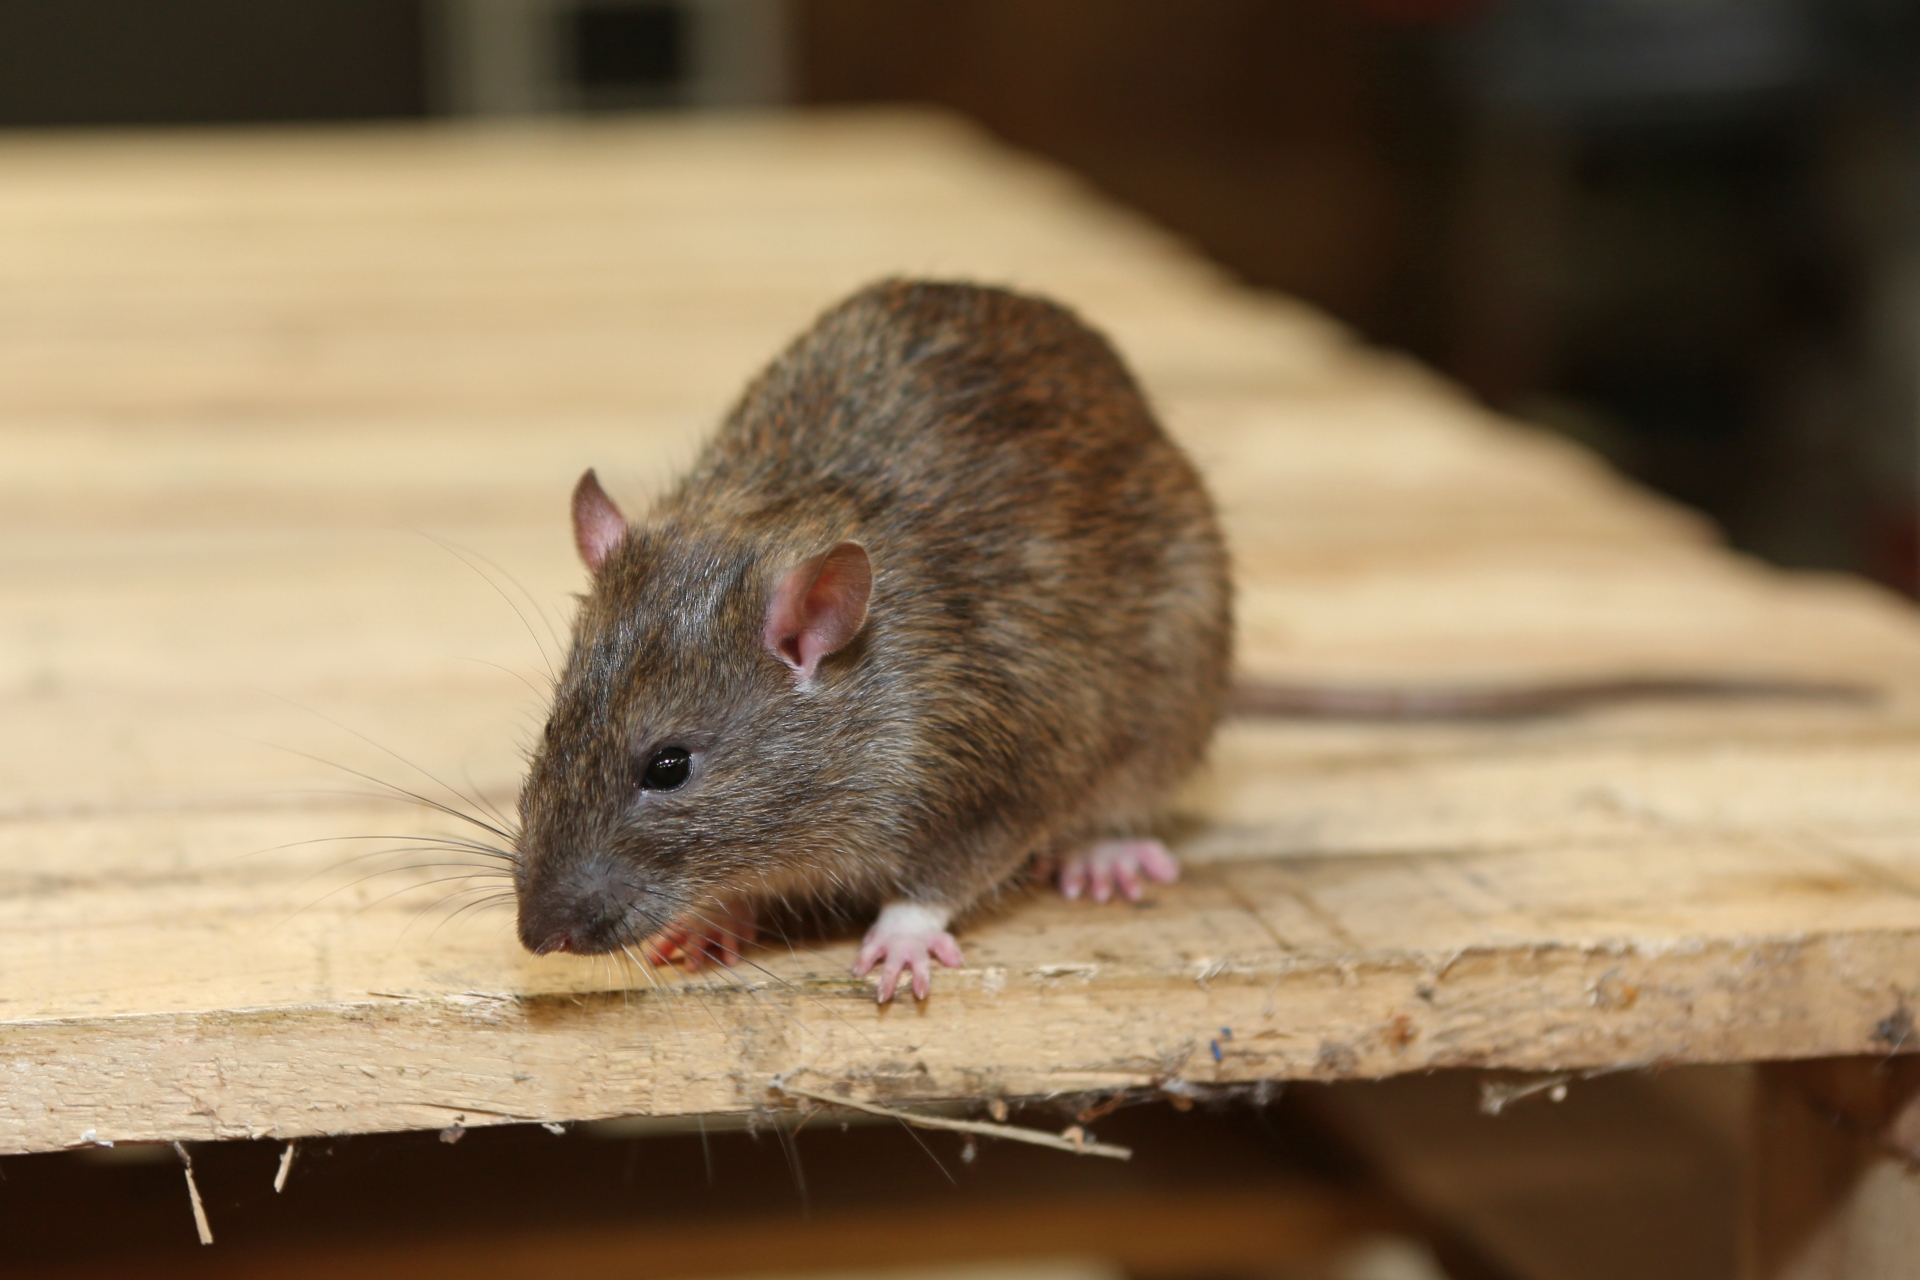 Rat extermination, Pest Control in Archway, N19. Call Now 020 8166 9746